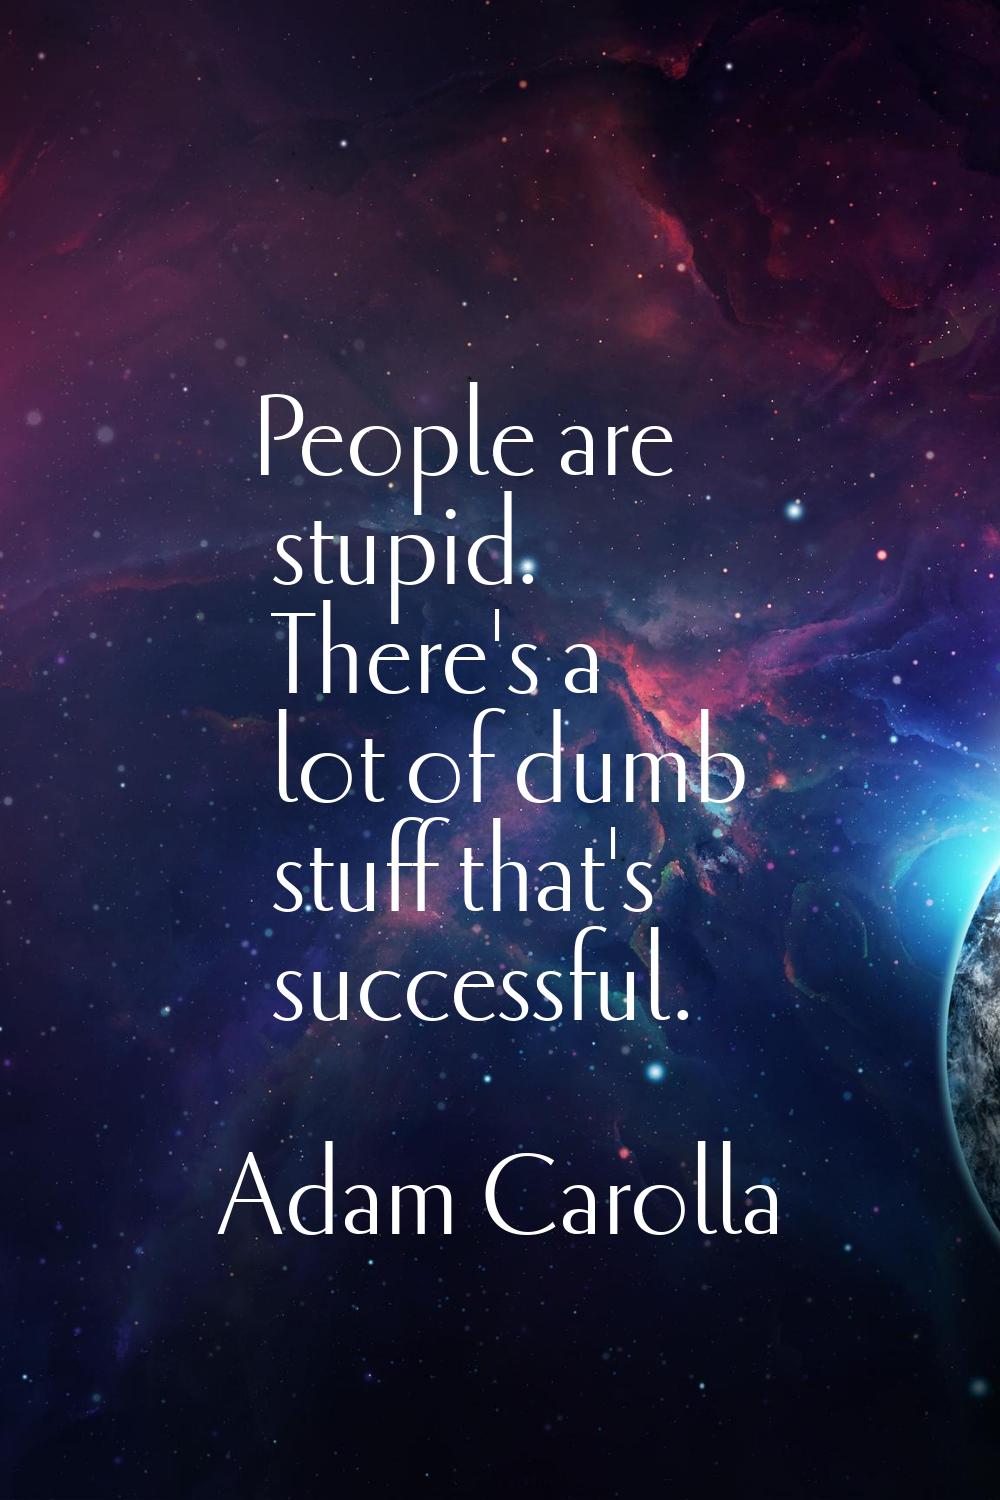 People are stupid. There's a lot of dumb stuff that's successful.